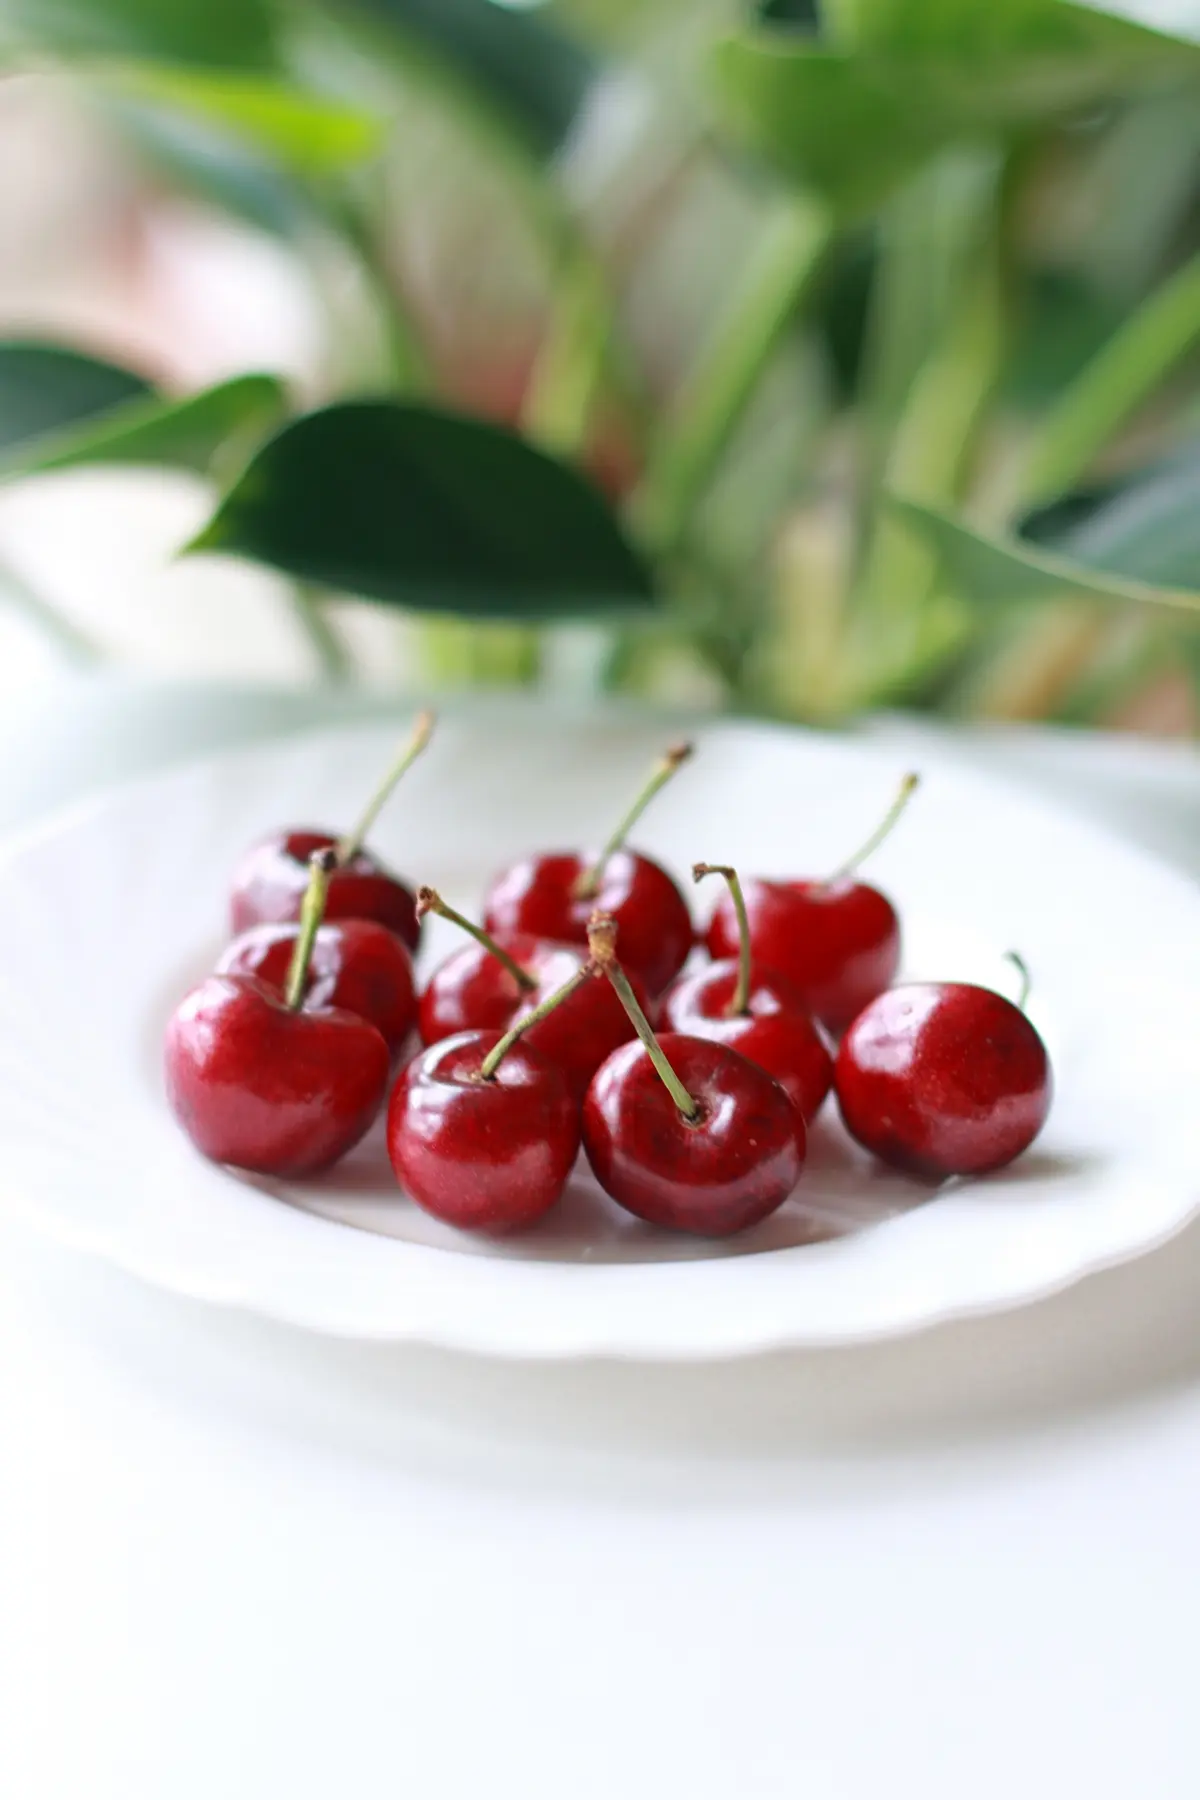 limit yourself to say 8 to 10 cherries per day on keto diet